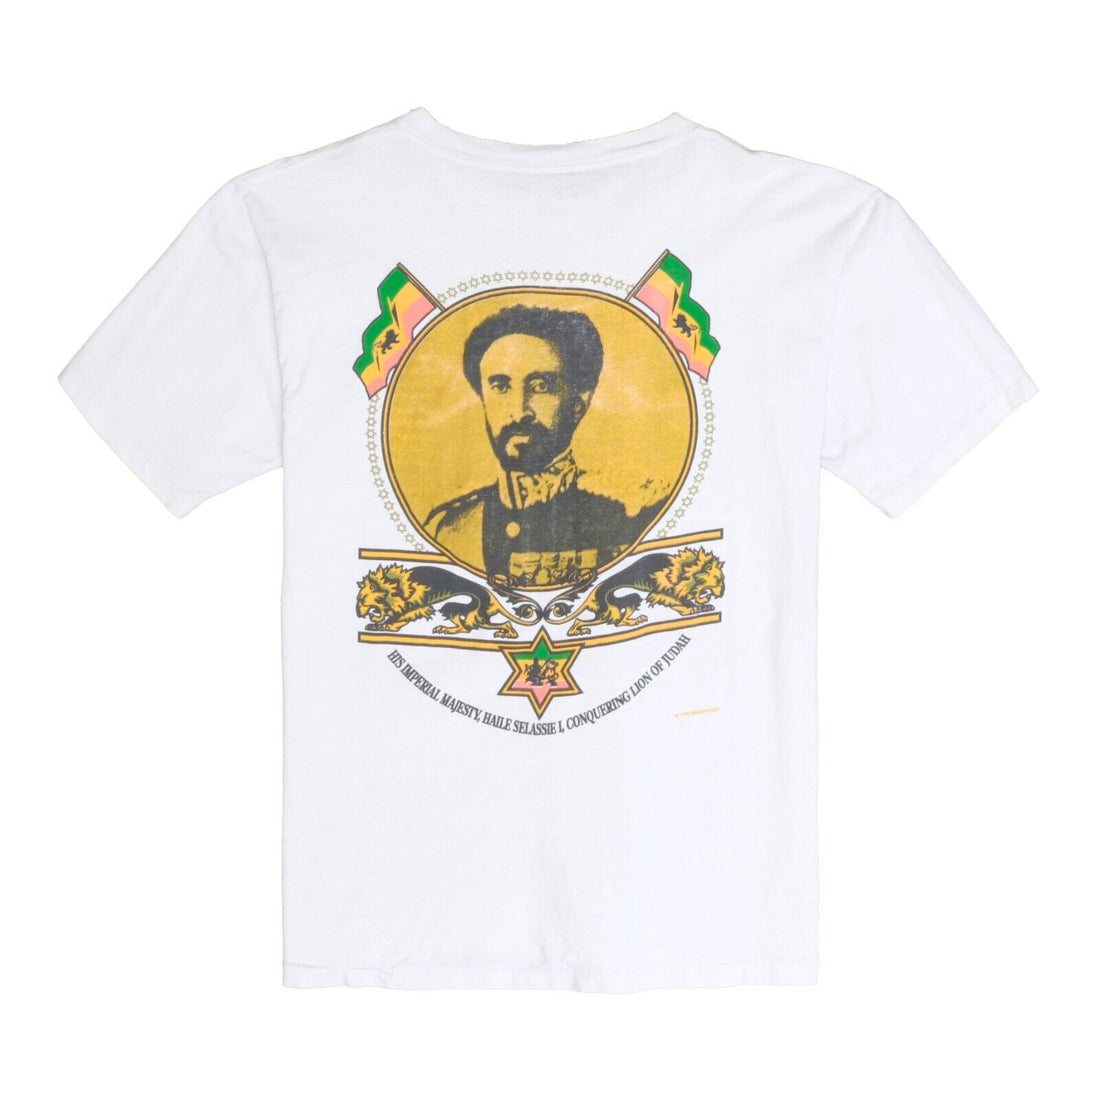 Vintage Haile Selassie Imperial Majesty T-Shirt Size Large White 1993 90s